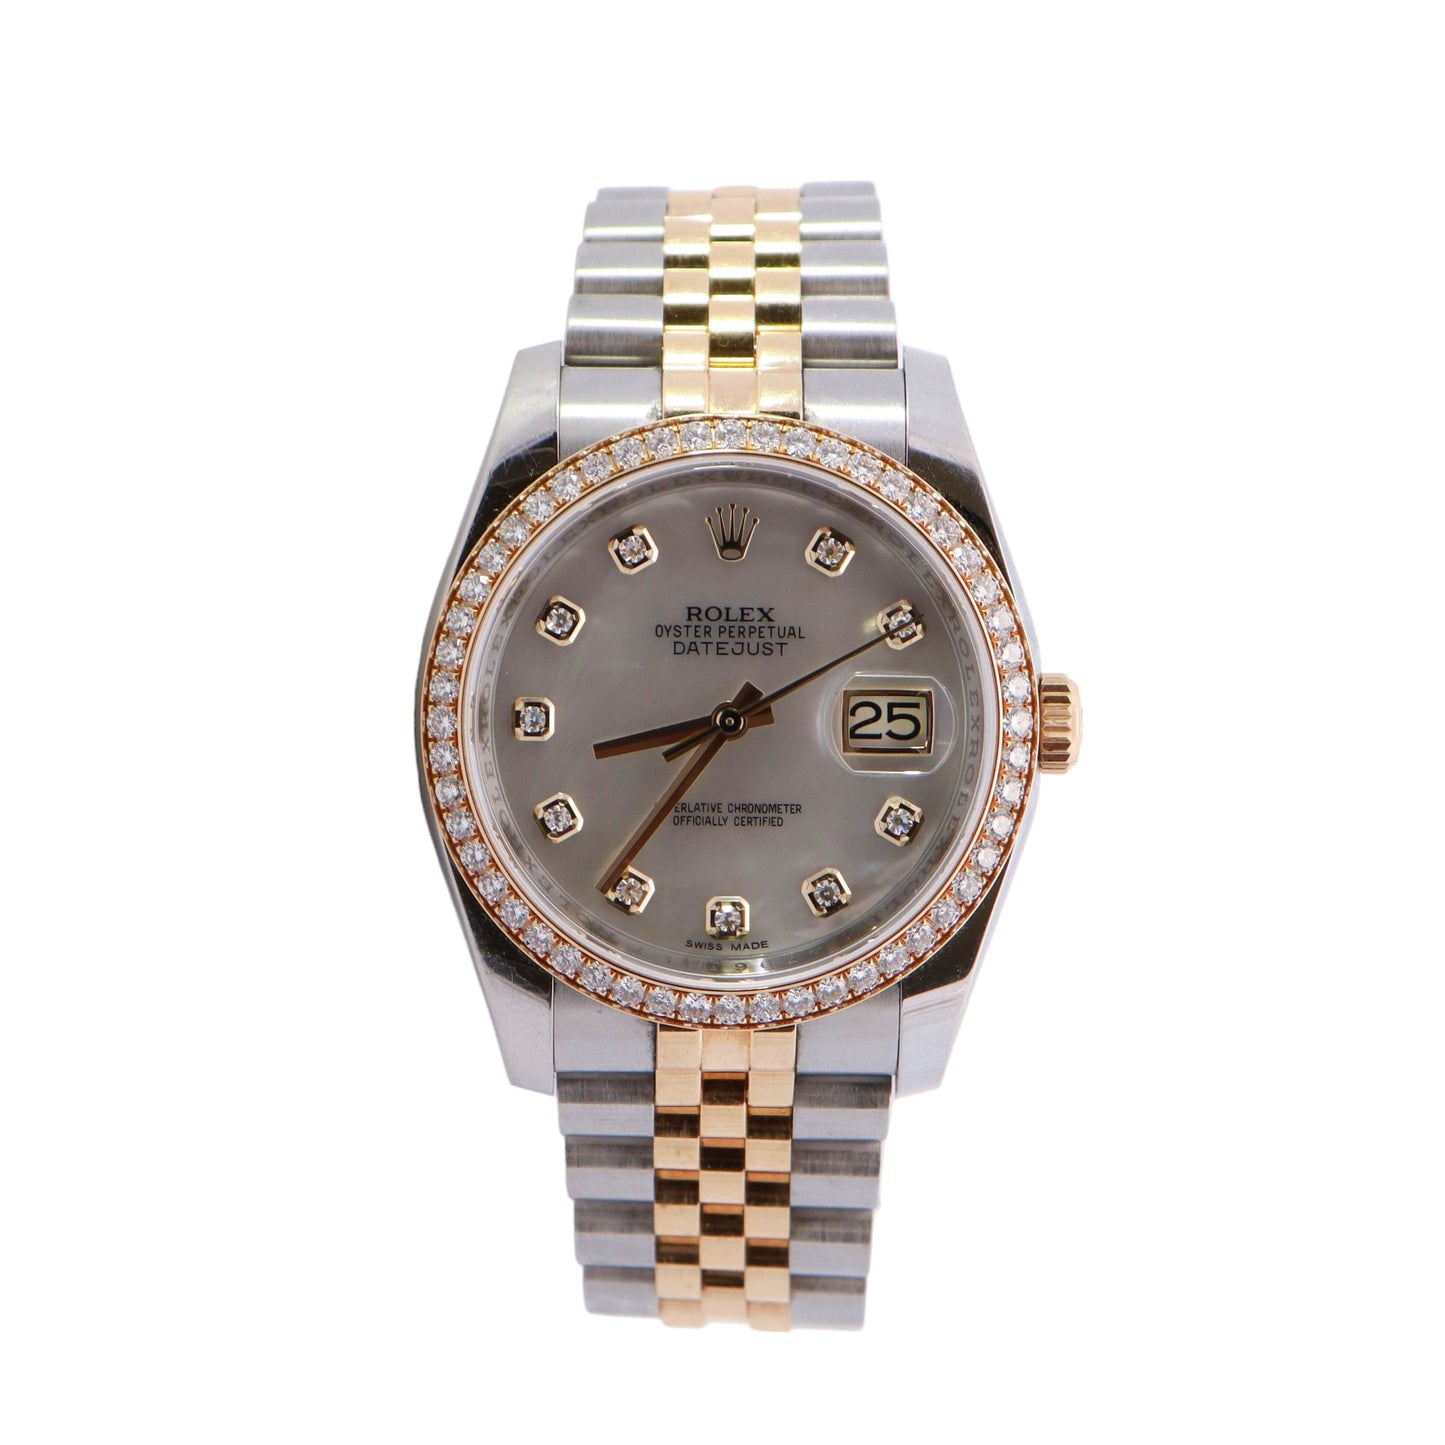 Rolex Datejust 36mm Two Tone Stainless Steel & Yellow Gold Factory Mother Of Pearl Diamond Dial Watch Reference #: 116243 - Happy Jewelers Fine Jewelry Lifetime Warranty